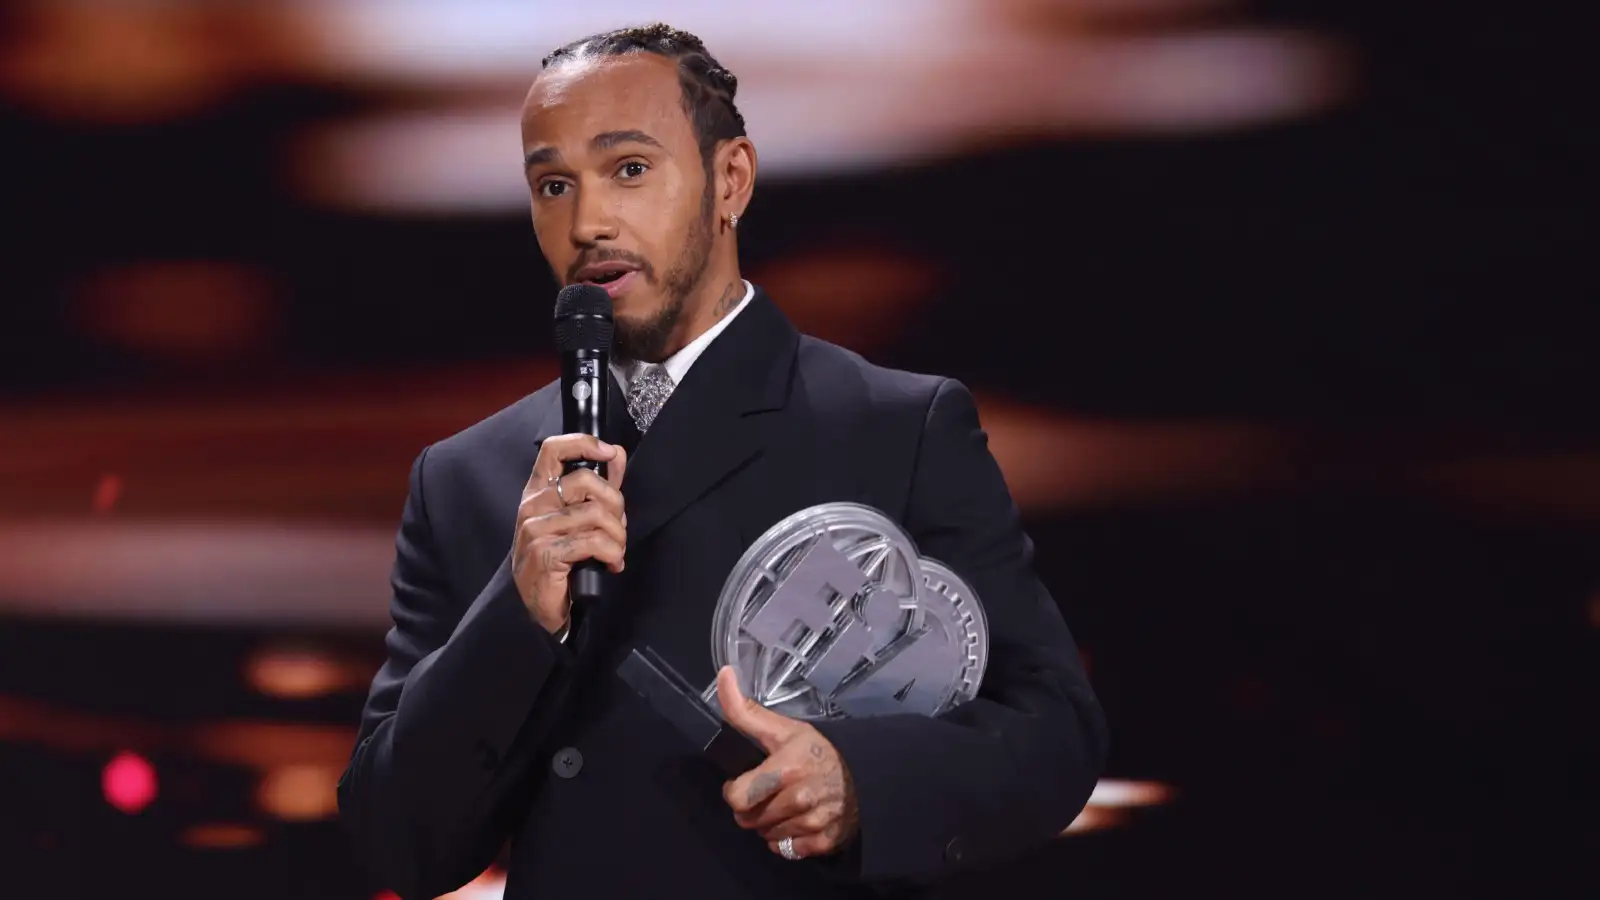 Lewis Hamilton addresses the audience at the FIA Prize Giving Gala in Azerbaijan, where he received his third-place trophy.